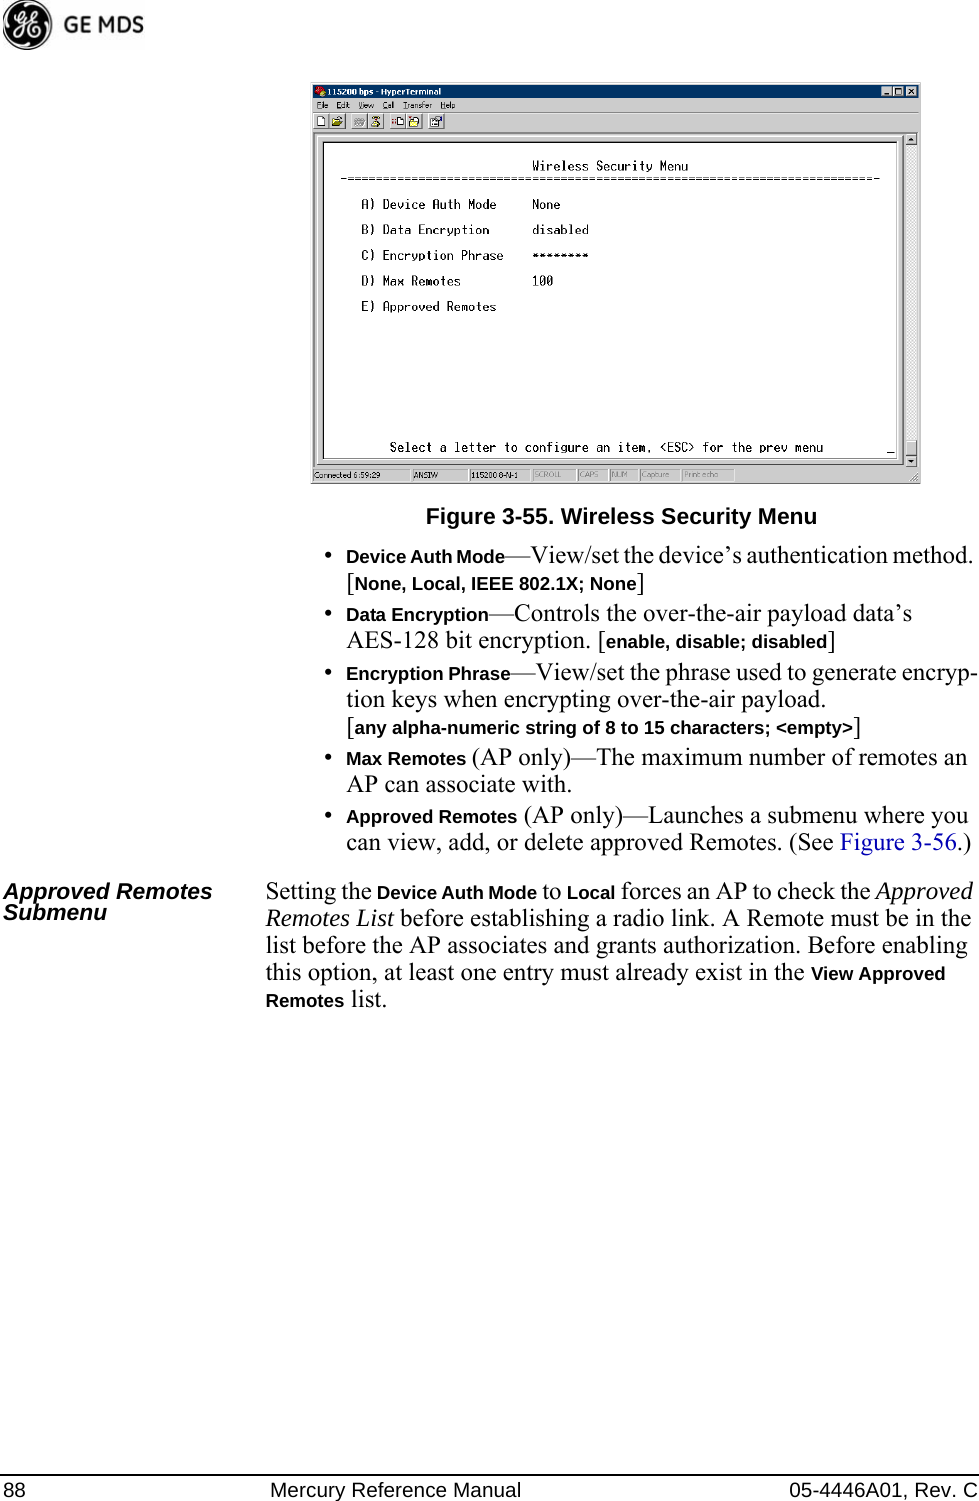 88 Mercury Reference Manual 05-4446A01, Rev. CInvisible place holderFigure 3-55. Wireless Security Menu•Device Auth Mode—View/set the device’s authentication method. [None, Local, IEEE 802.1X; None]•Data Encryption—Controls the over-the-air payload data’s AES-128 bit encryption. [enable, disable; disabled]•Encryption Phrase—View/set the phrase used to generate encryp-tion keys when encrypting over-the-air payload. [any alpha-numeric string of 8 to 15 characters; &lt;empty&gt;]•Max Remotes (AP only)—The maximum number of remotes an AP can associate with.•Approved Remotes (AP only)—Launches a submenu where you can view, add, or delete approved Remotes. (See Figure 3-56.)Approved Remotes Submenu Setting the Device Auth Mode to Local forces an AP to check the Approved Remotes List before establishing a radio link. A Remote must be in the list before the AP associates and grants authorization. Before enabling this option, at least one entry must already exist in the View Approved Remotes list.